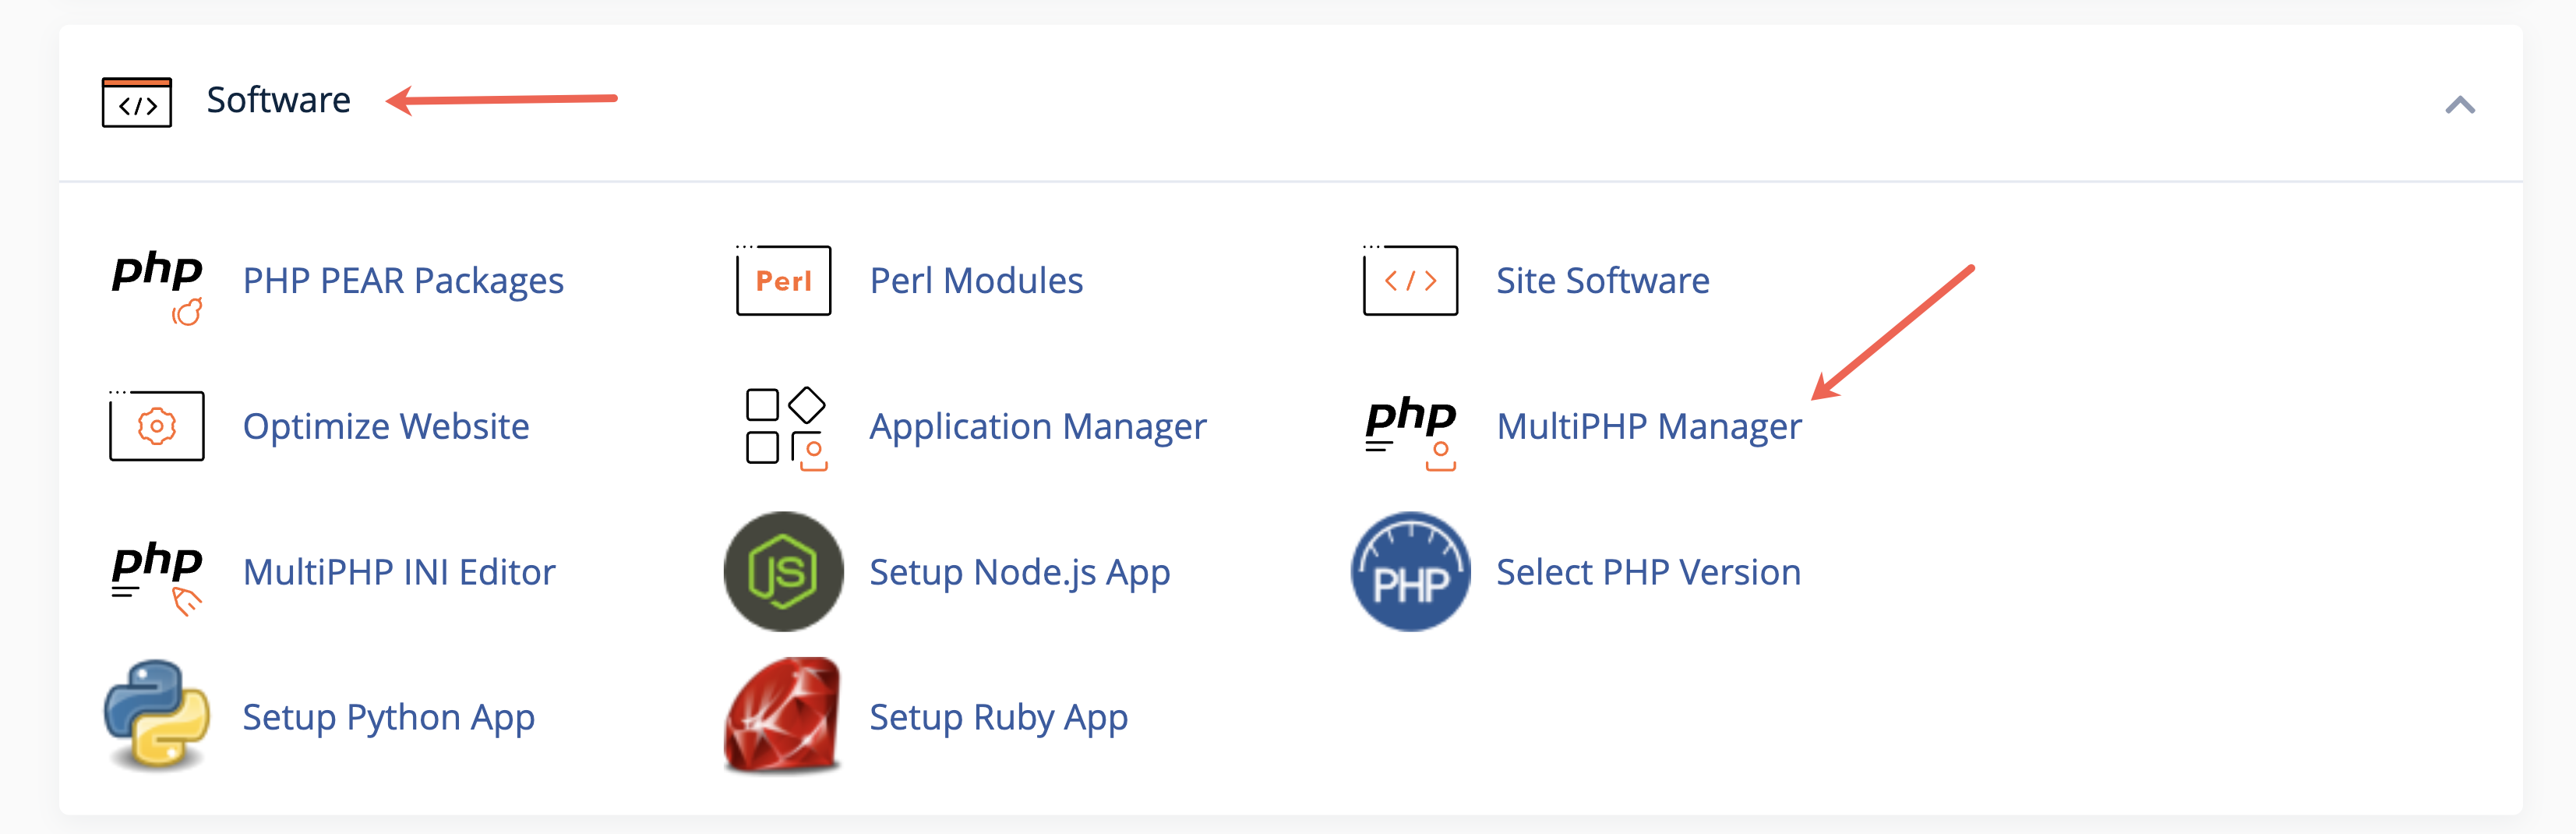 Figure 5: cPanel Dashboard Software Section